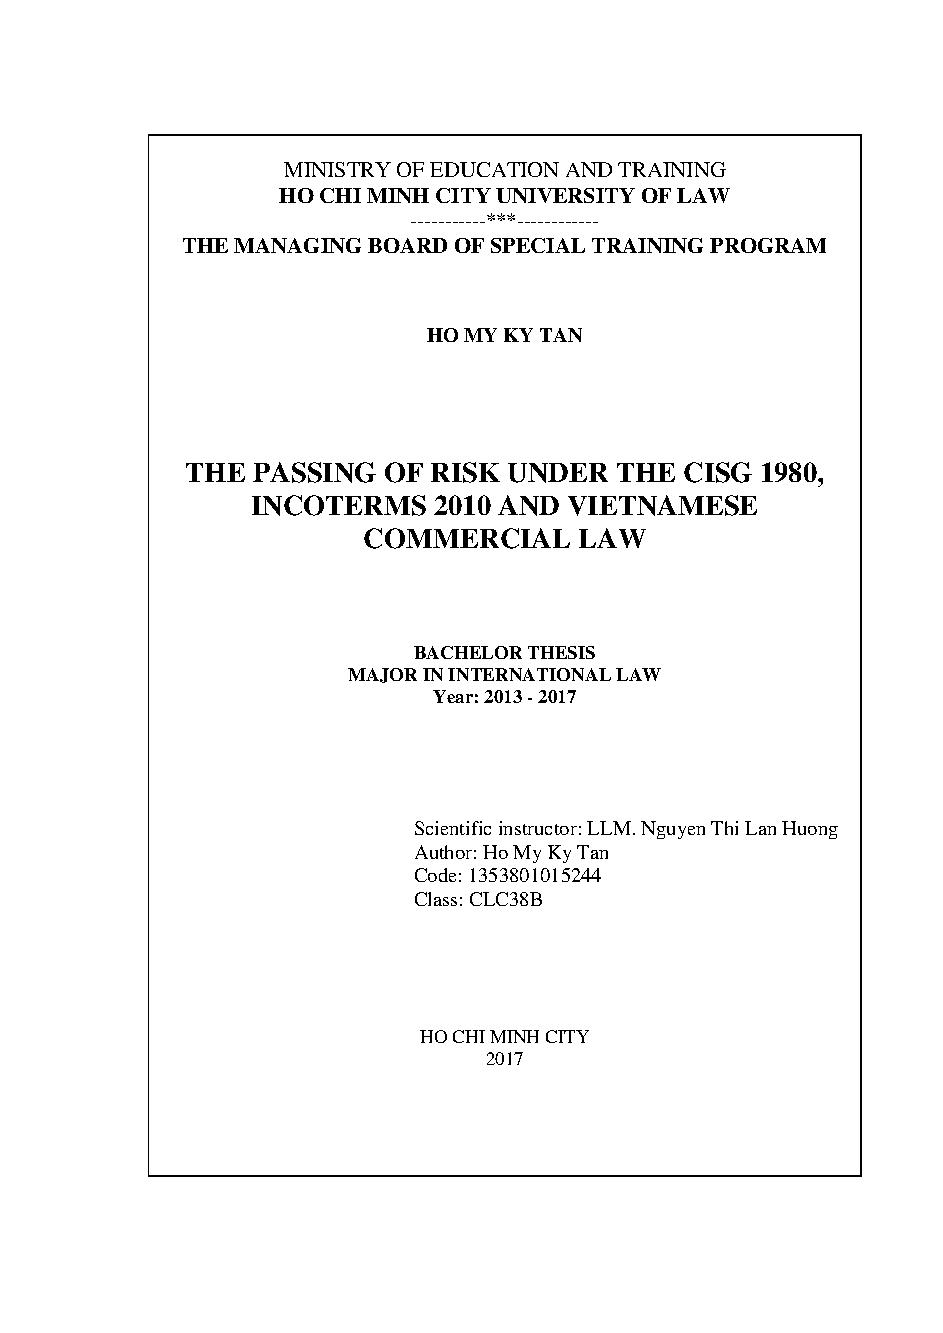 The passing of risk under the CISG 1980, incoterms 2010 and Vietnamese commercial